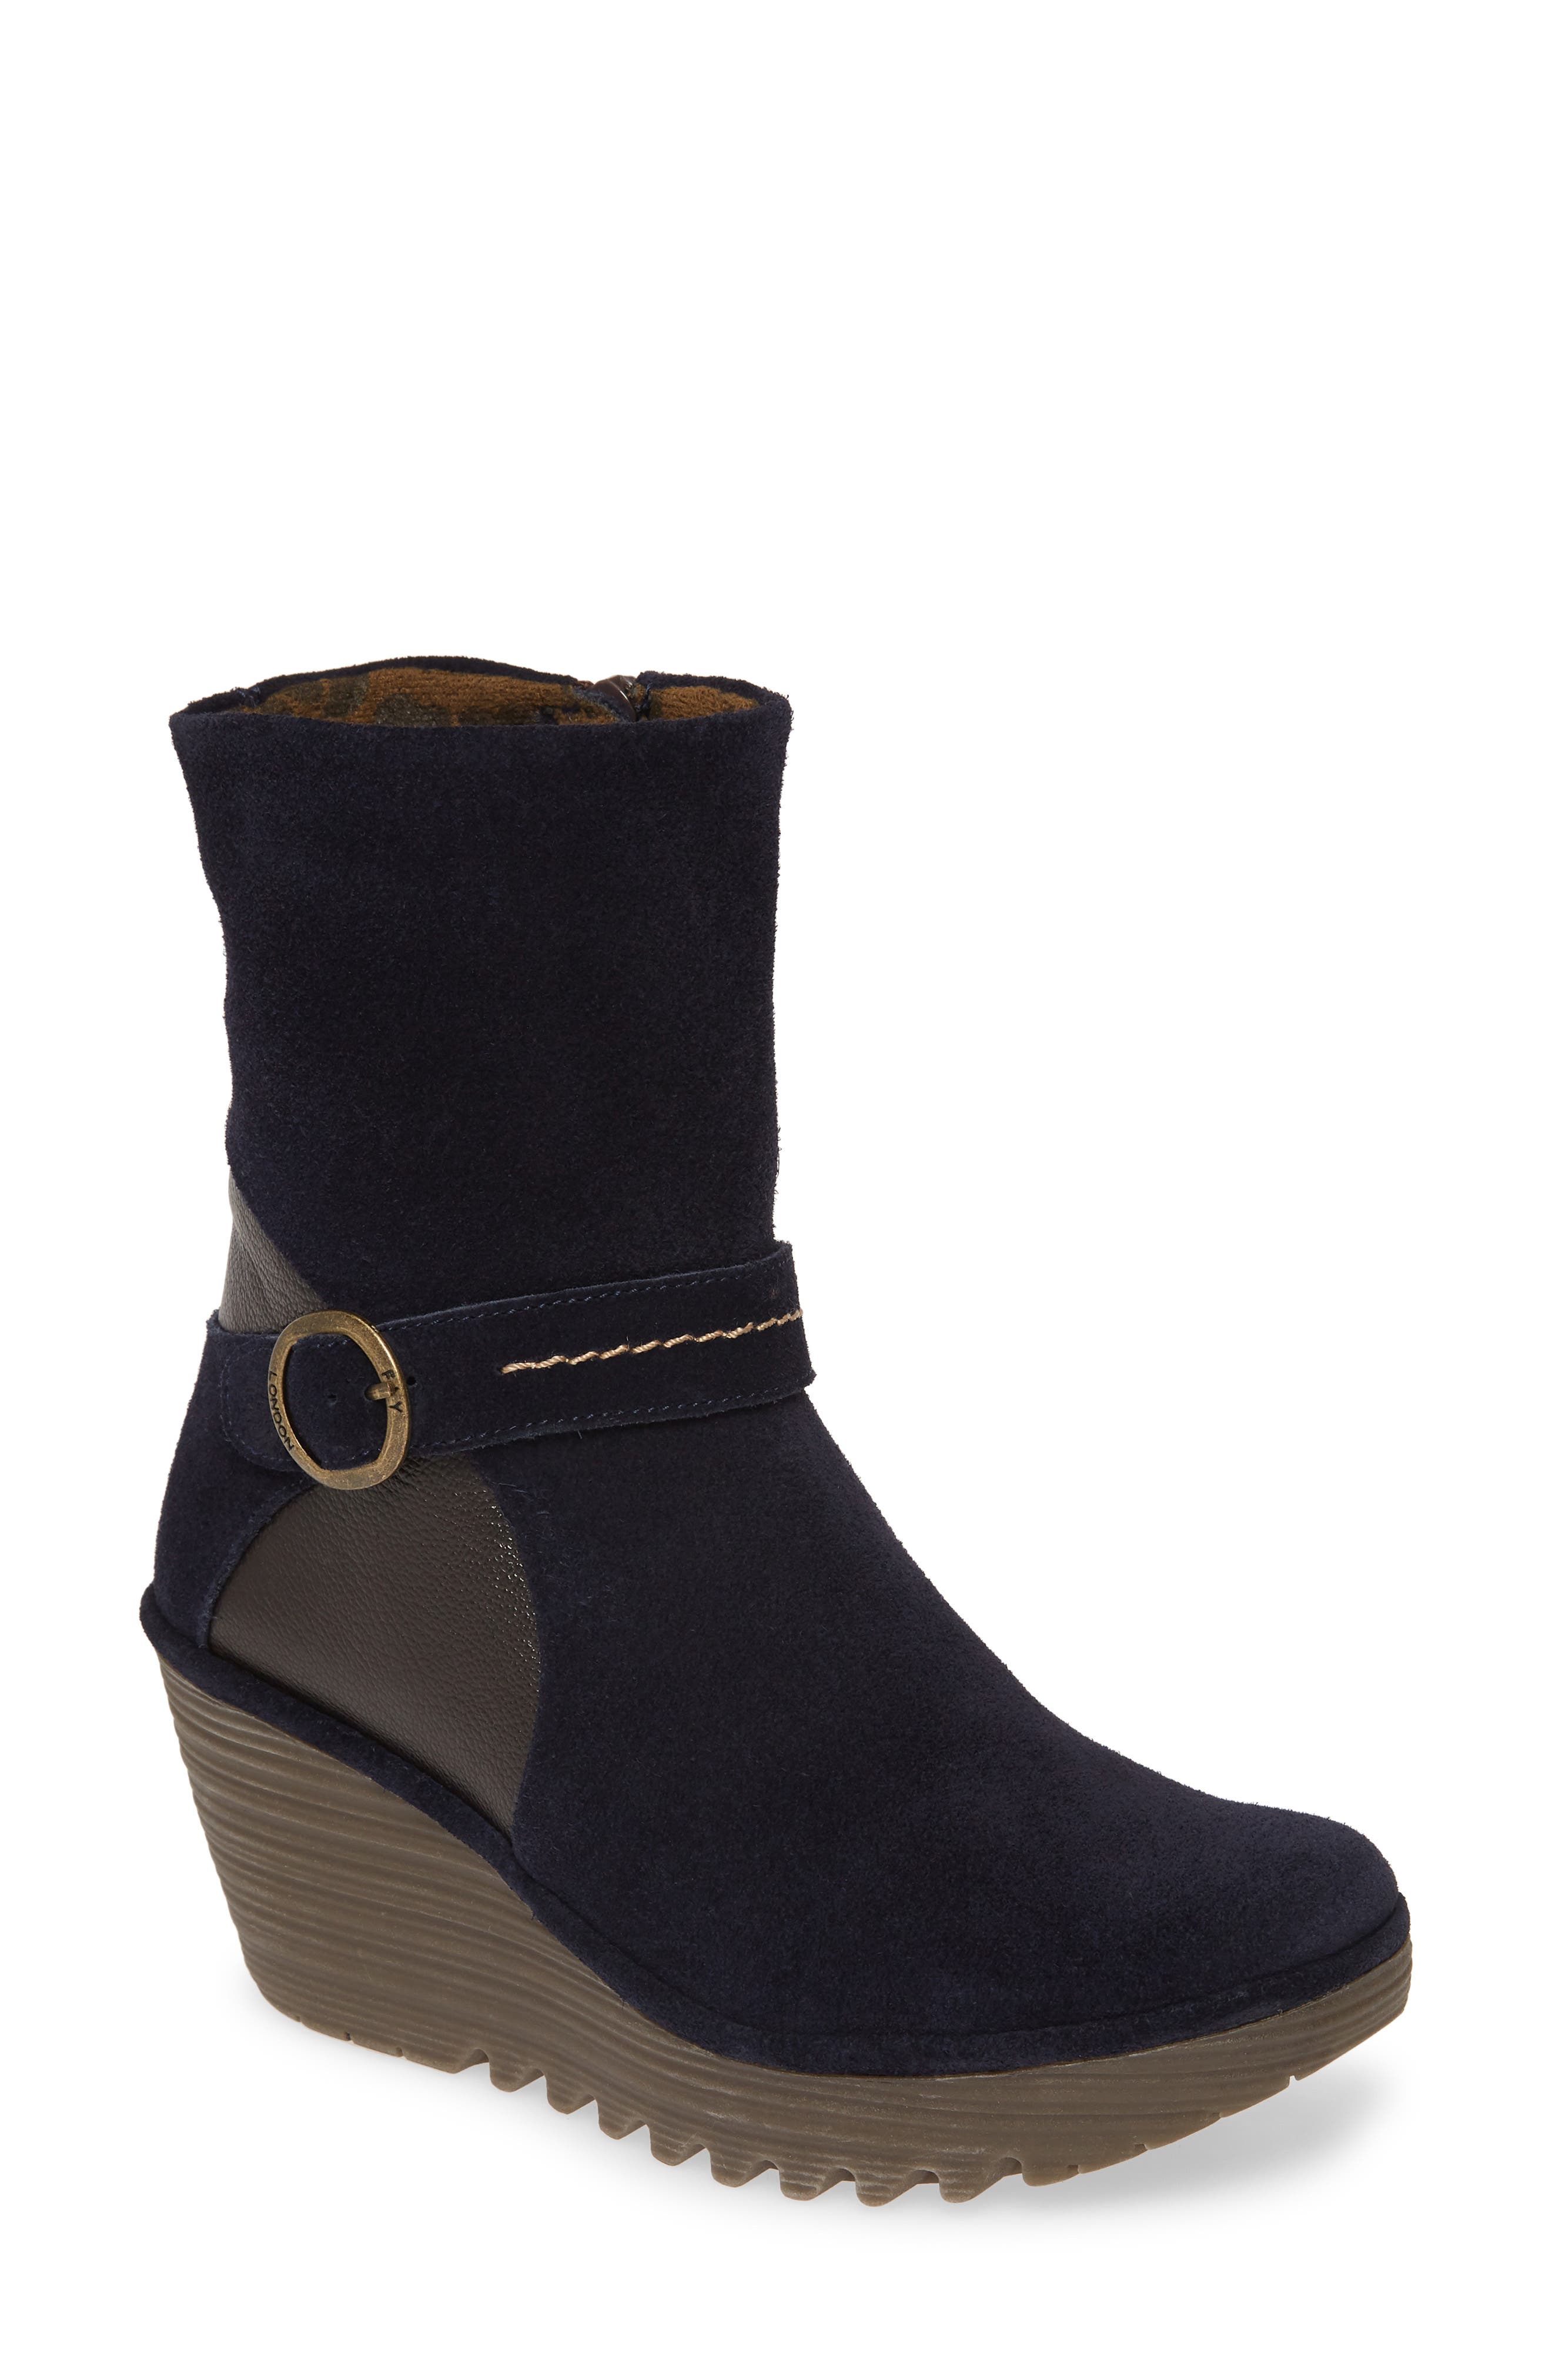 FLY London | Yome Wedge Bootie 